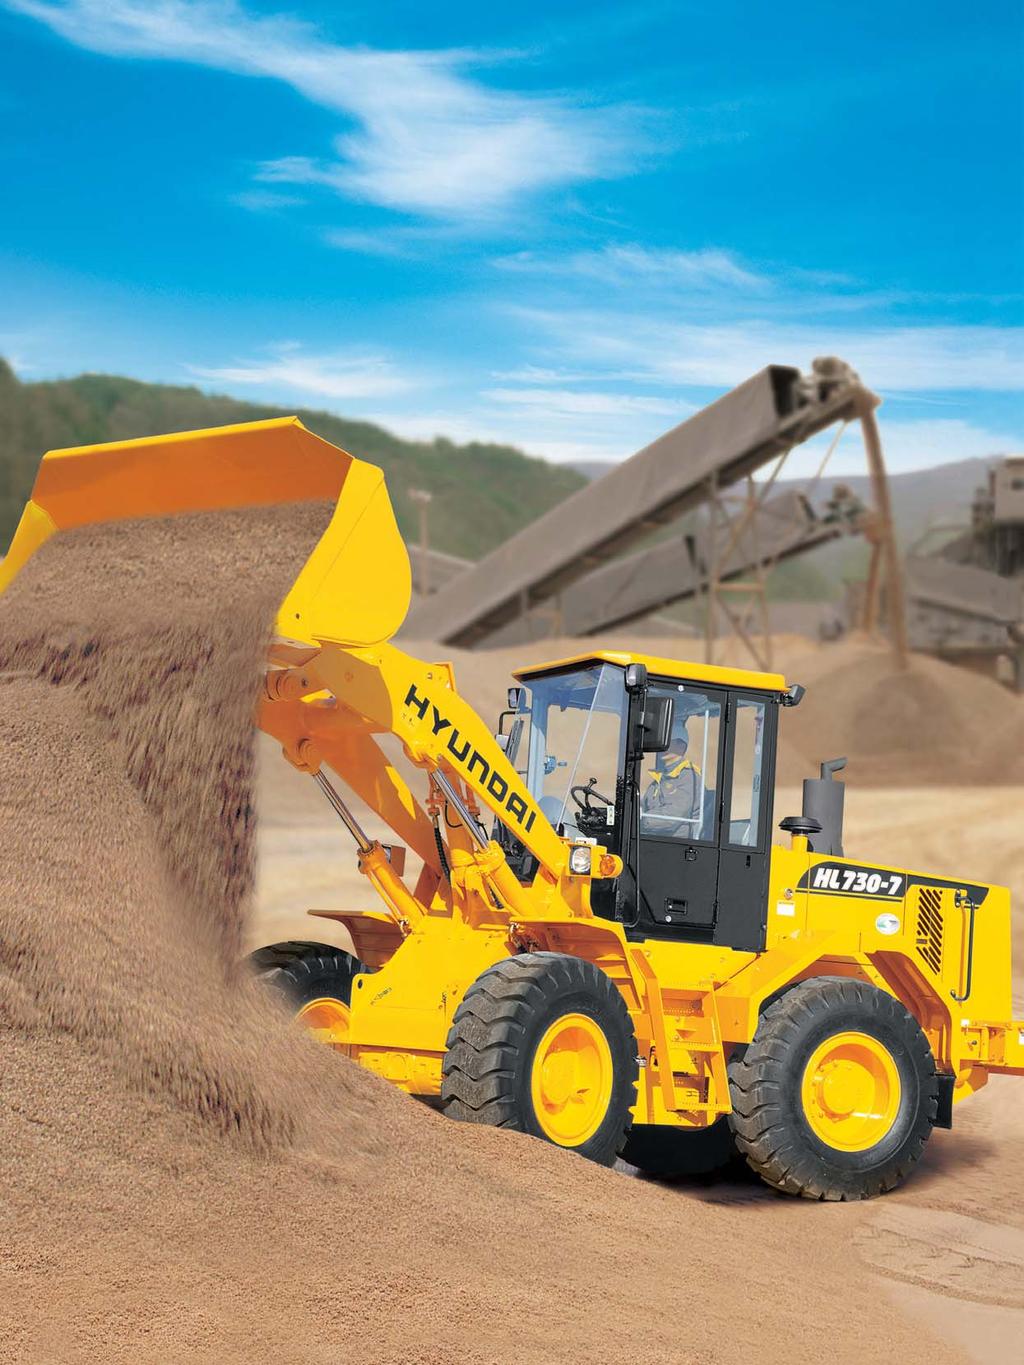 Bucket Selection Guide Supplemental Specifications www.hyundai-ce.com Bucket Capacity, m 3 (yd 3 ) 2.4 (3.1) 2.2 (2.9) 2.0 (2.6) 1.8 (2.4) 1.6 (2.1) 1.4 (1.8) 1.2 (1.